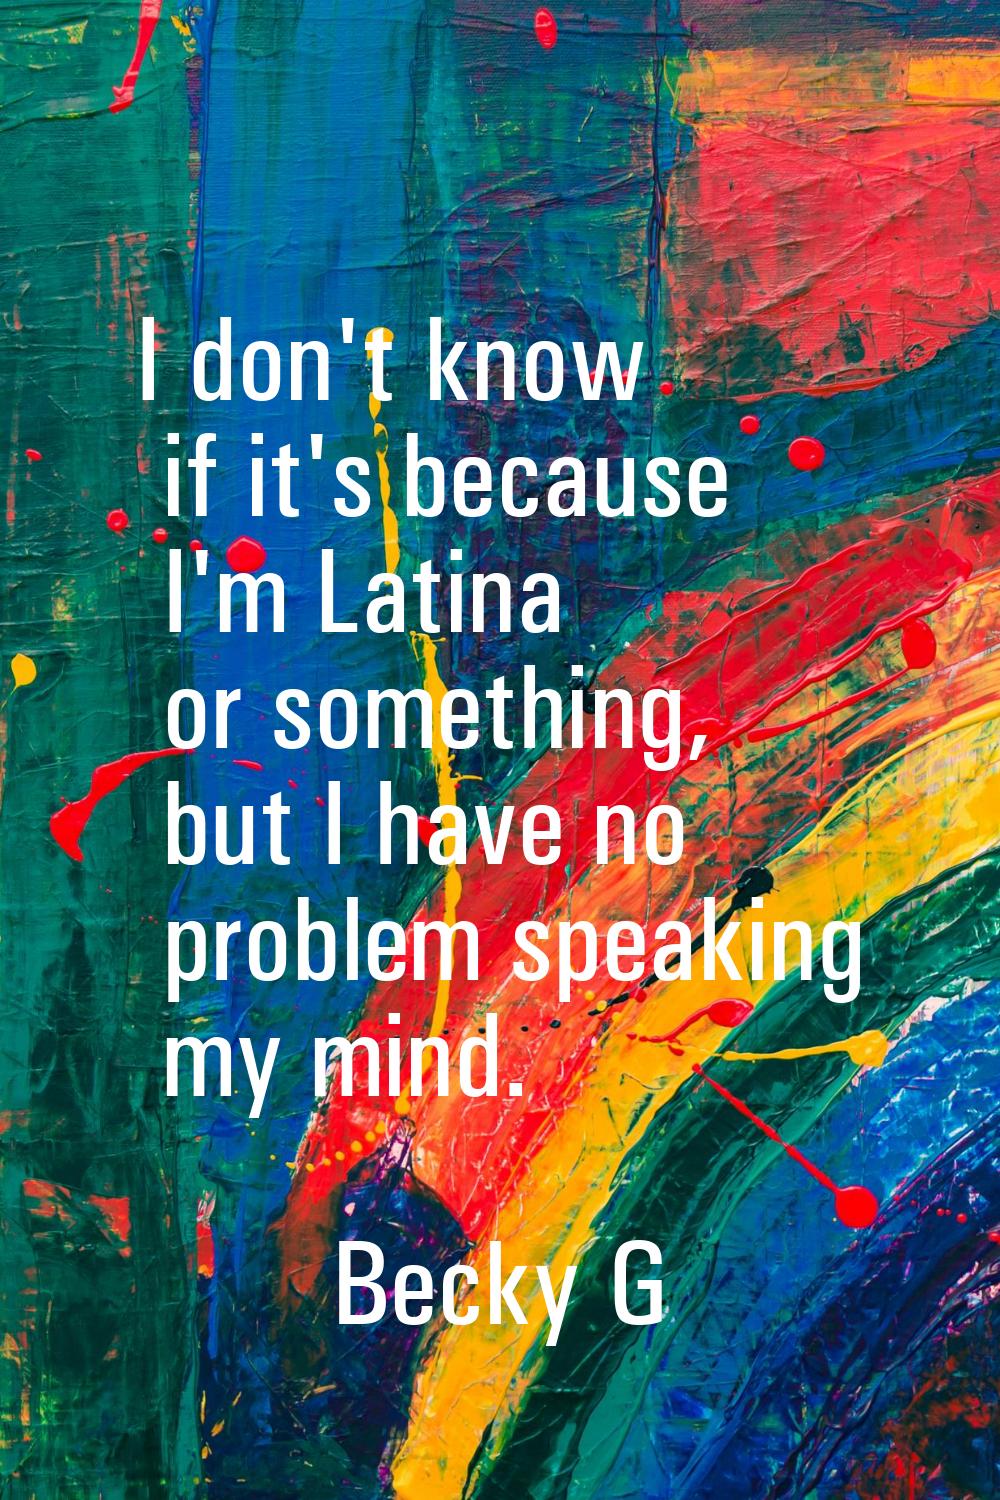 I don't know if it's because I'm Latina or something, but I have no problem speaking my mind.